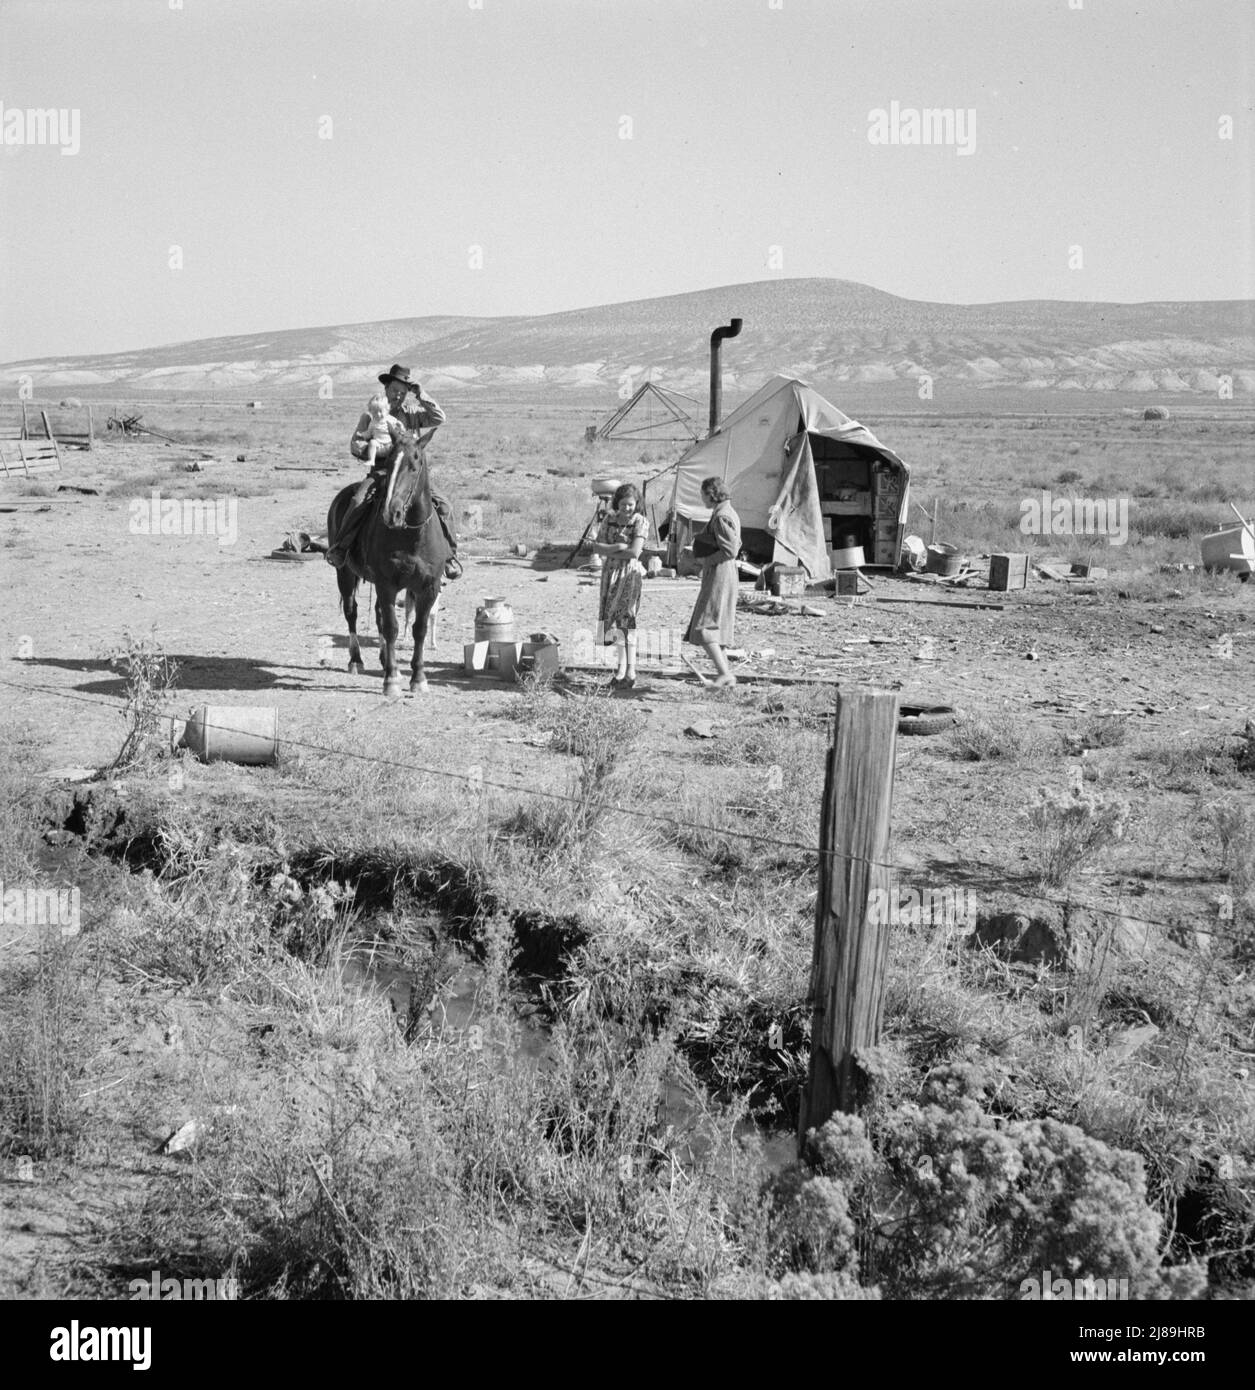 Fairbanks' home. Home Management Supervisor of FSA (Farm Security Administration) tries to persuade wife to screen tent. Willow Creek area, Malheur County, Oregon. Stock Photo